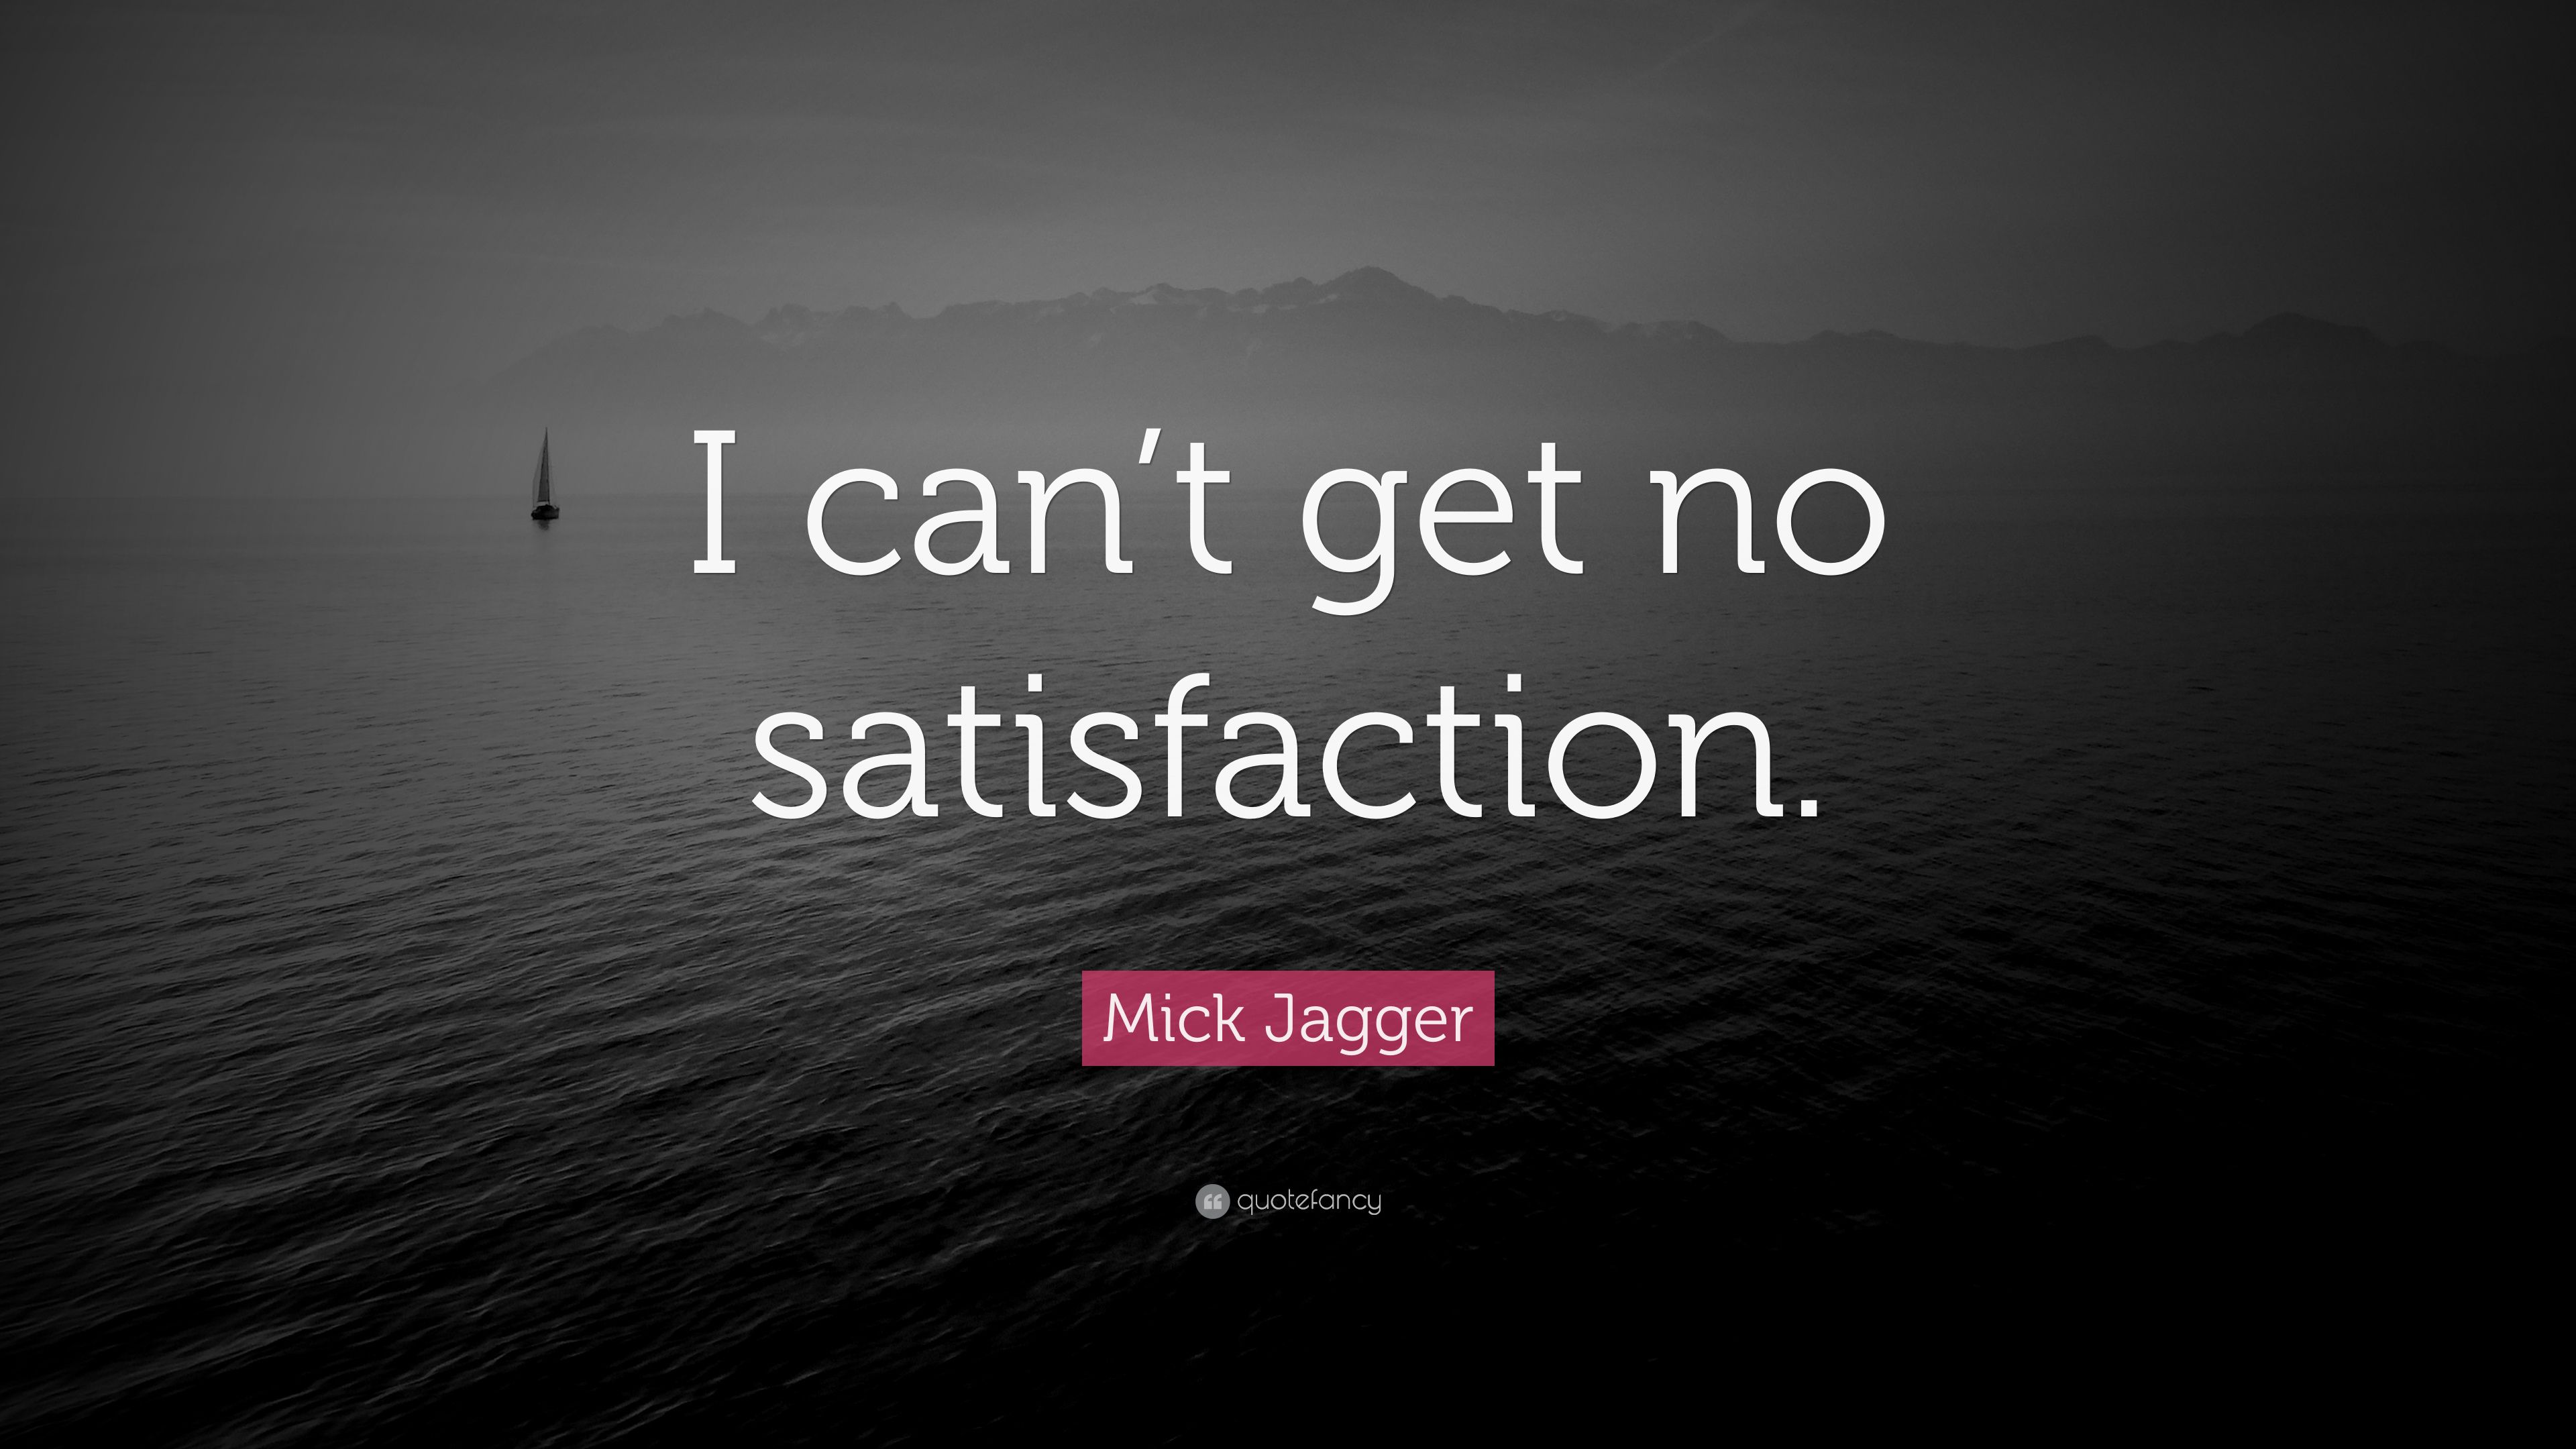 Mick Jagger Quote: “I can't get no satisfaction.” (7 wallpaper)